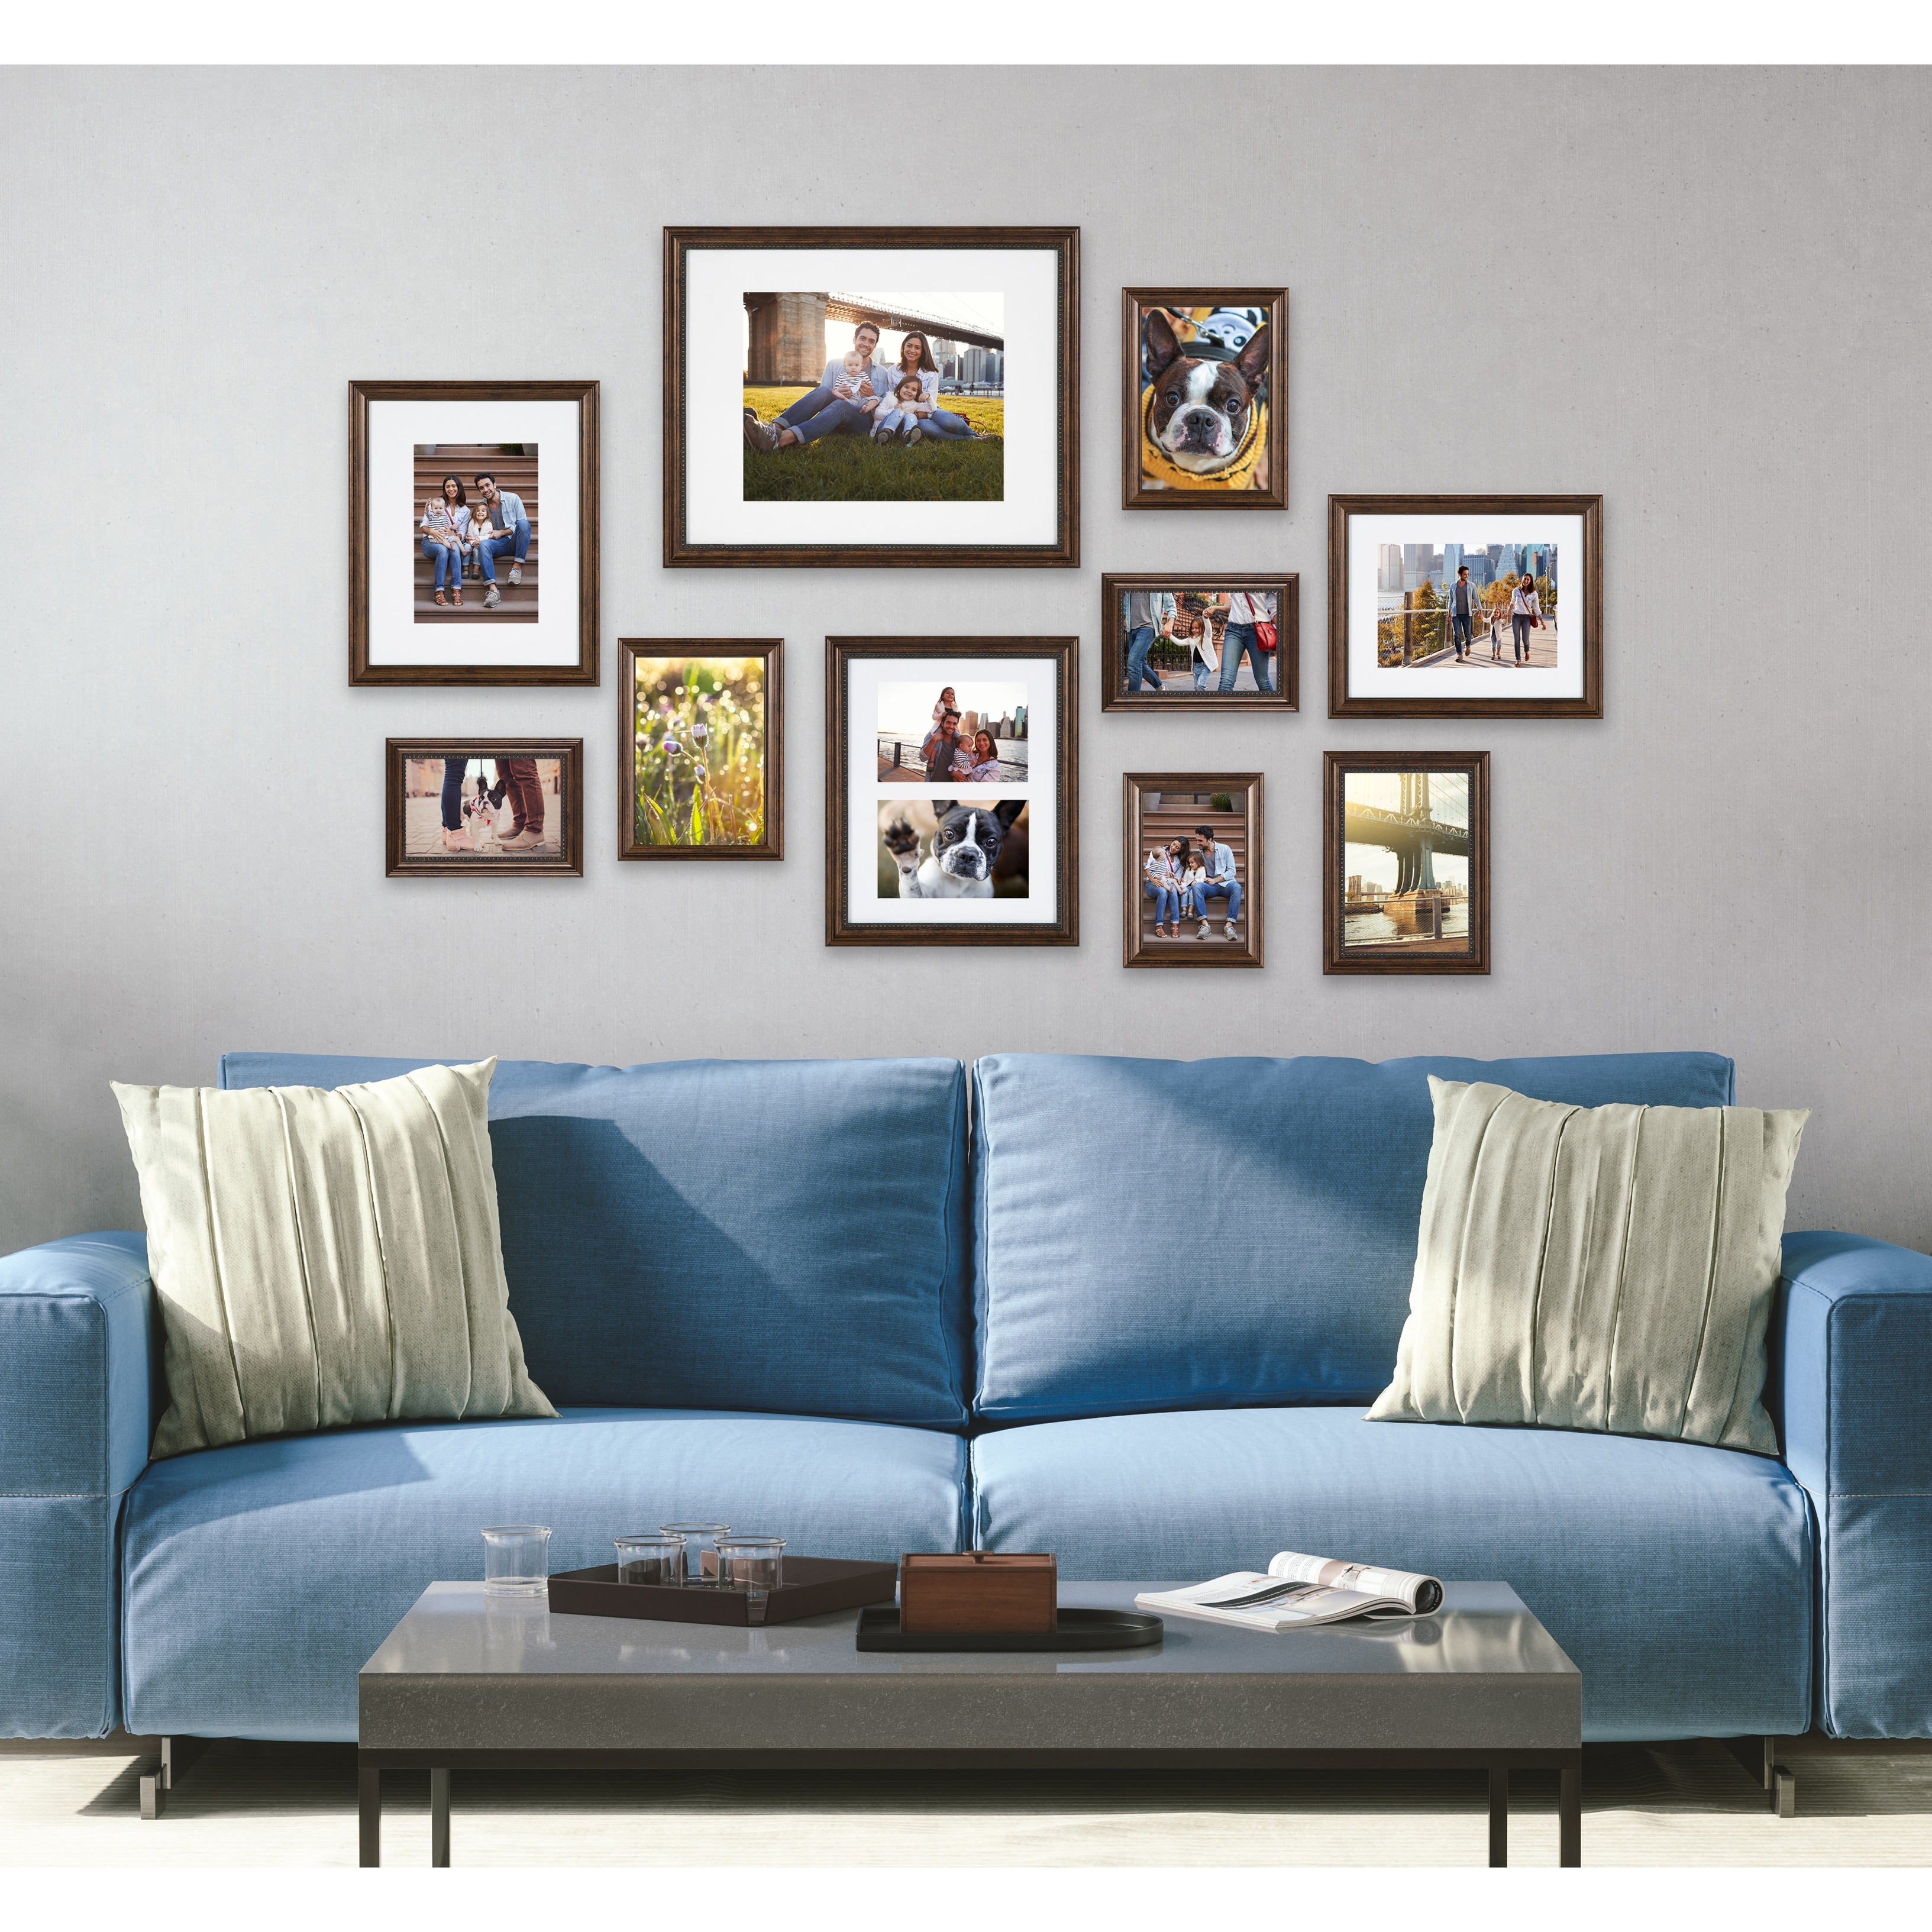 https://ak1.ostkcdn.com/images/products/is/images/direct/c47e84d38bb3d1ca4ab0dc4a9c7b457b4e5e5148/Kate-and-Laurel-Traditional-Wall-Picture-Frame-Set.jpg